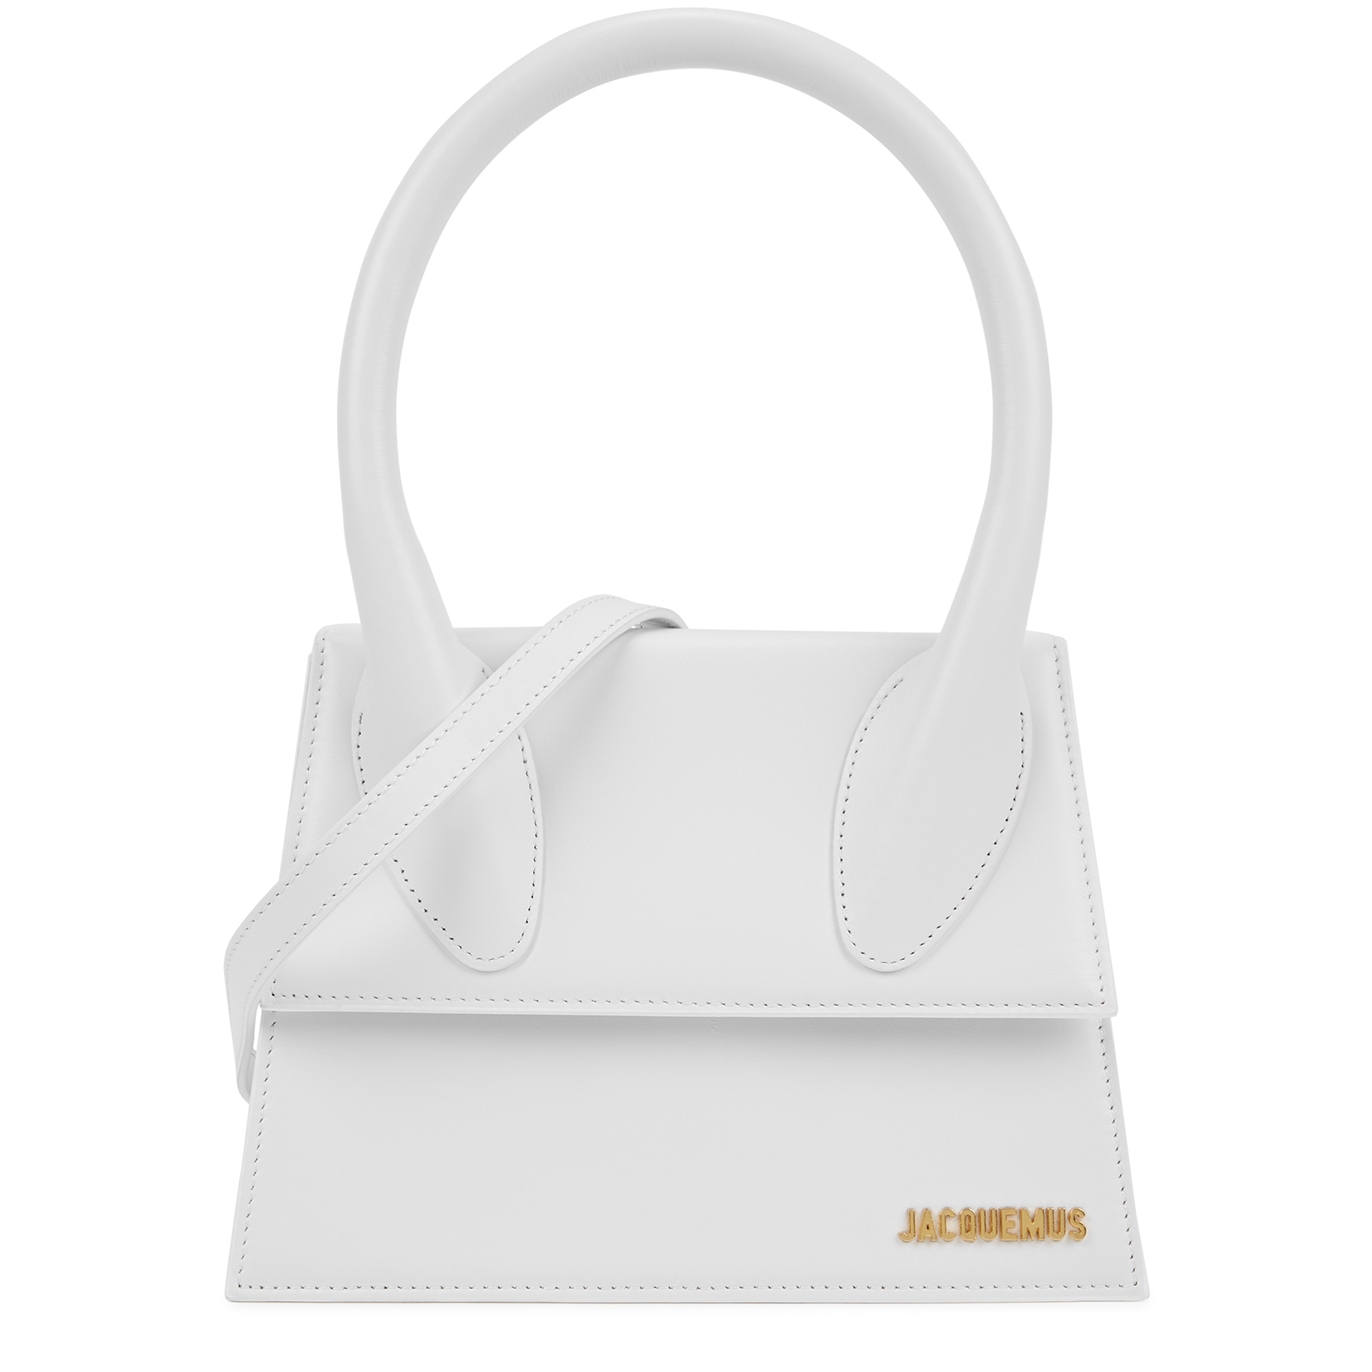 Jacquemus Le Grand Chiquito Leather Handle Bag, top Handle Bag, White